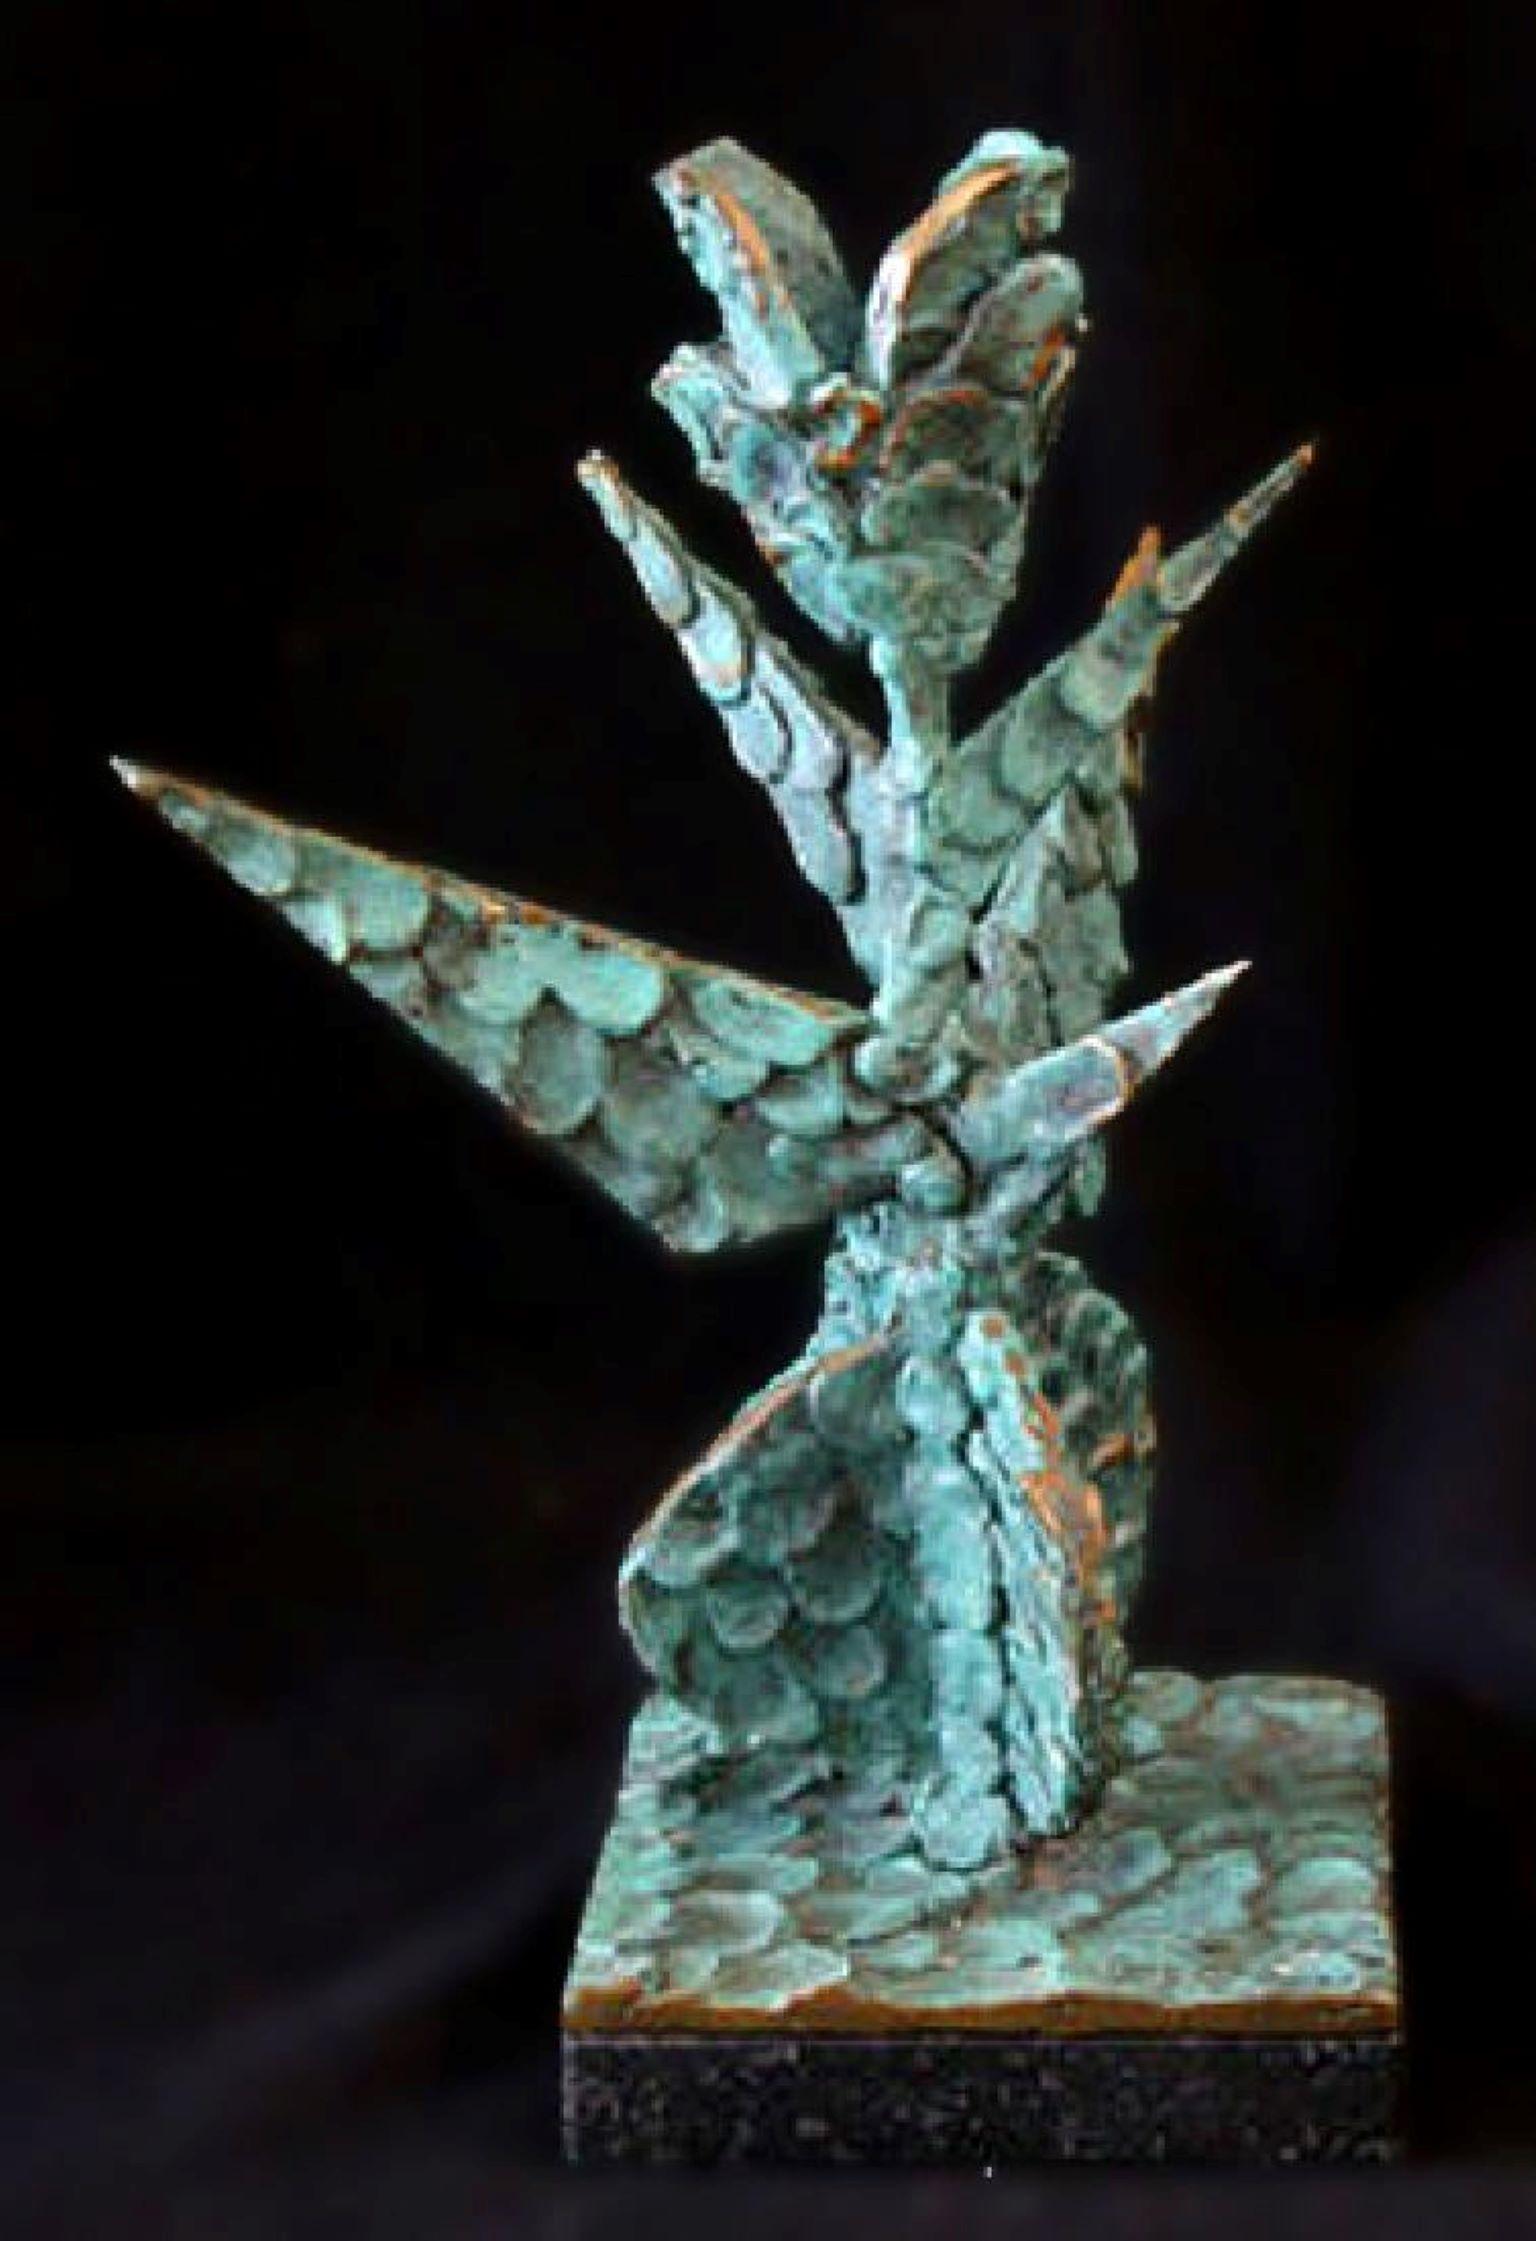 Patrick McElroy Figurative Sculpture - "Organic Form" Signed, Bronze Sculpture with Green Patina 